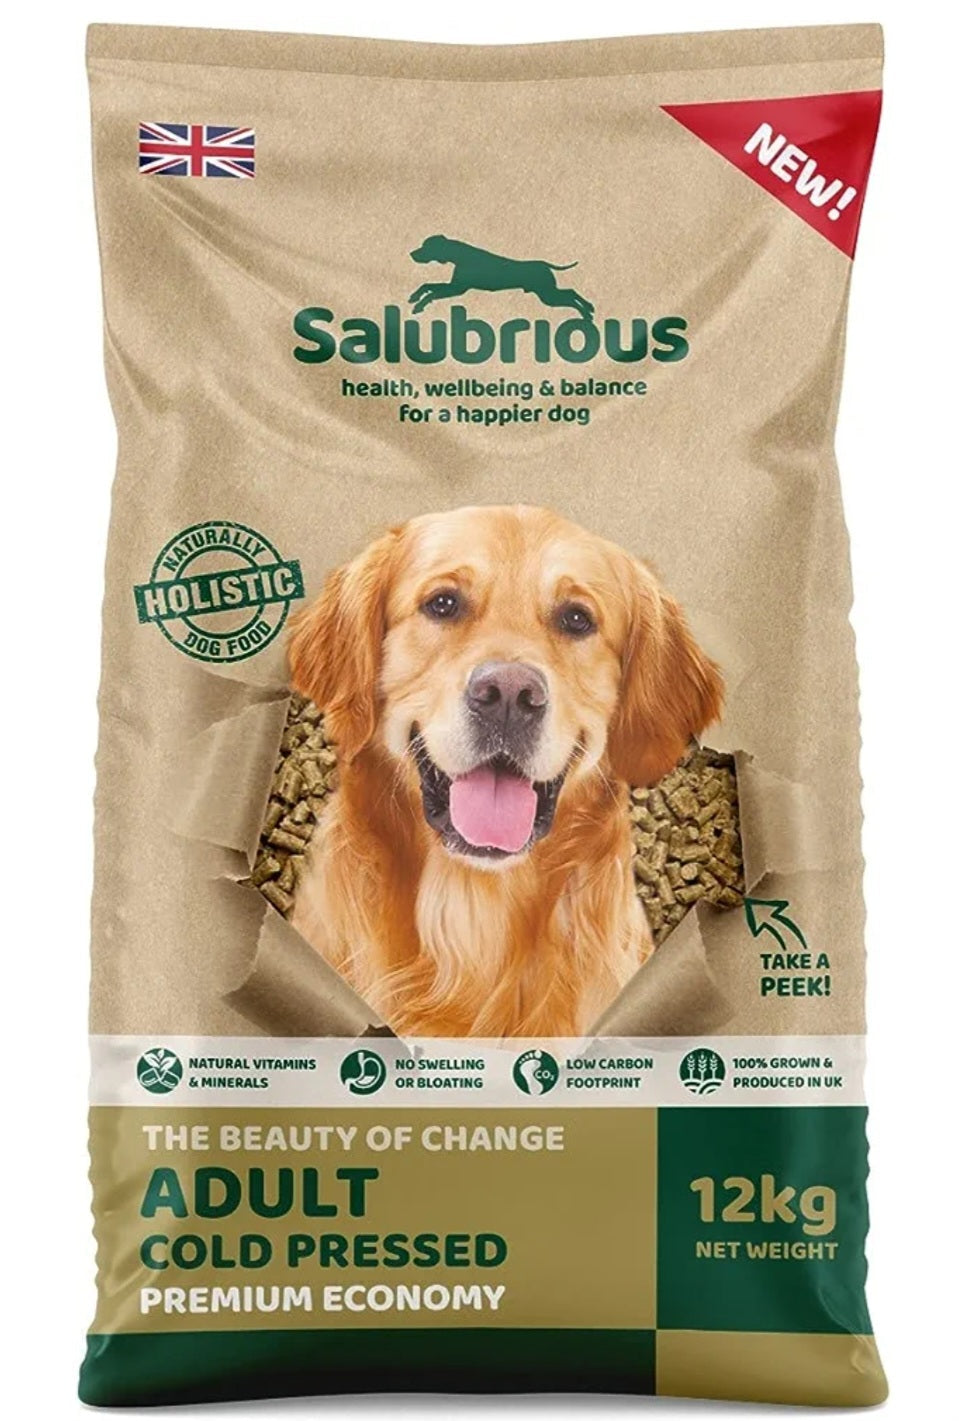 Salubrious Holistic and Hypo Allergenic Pet Food